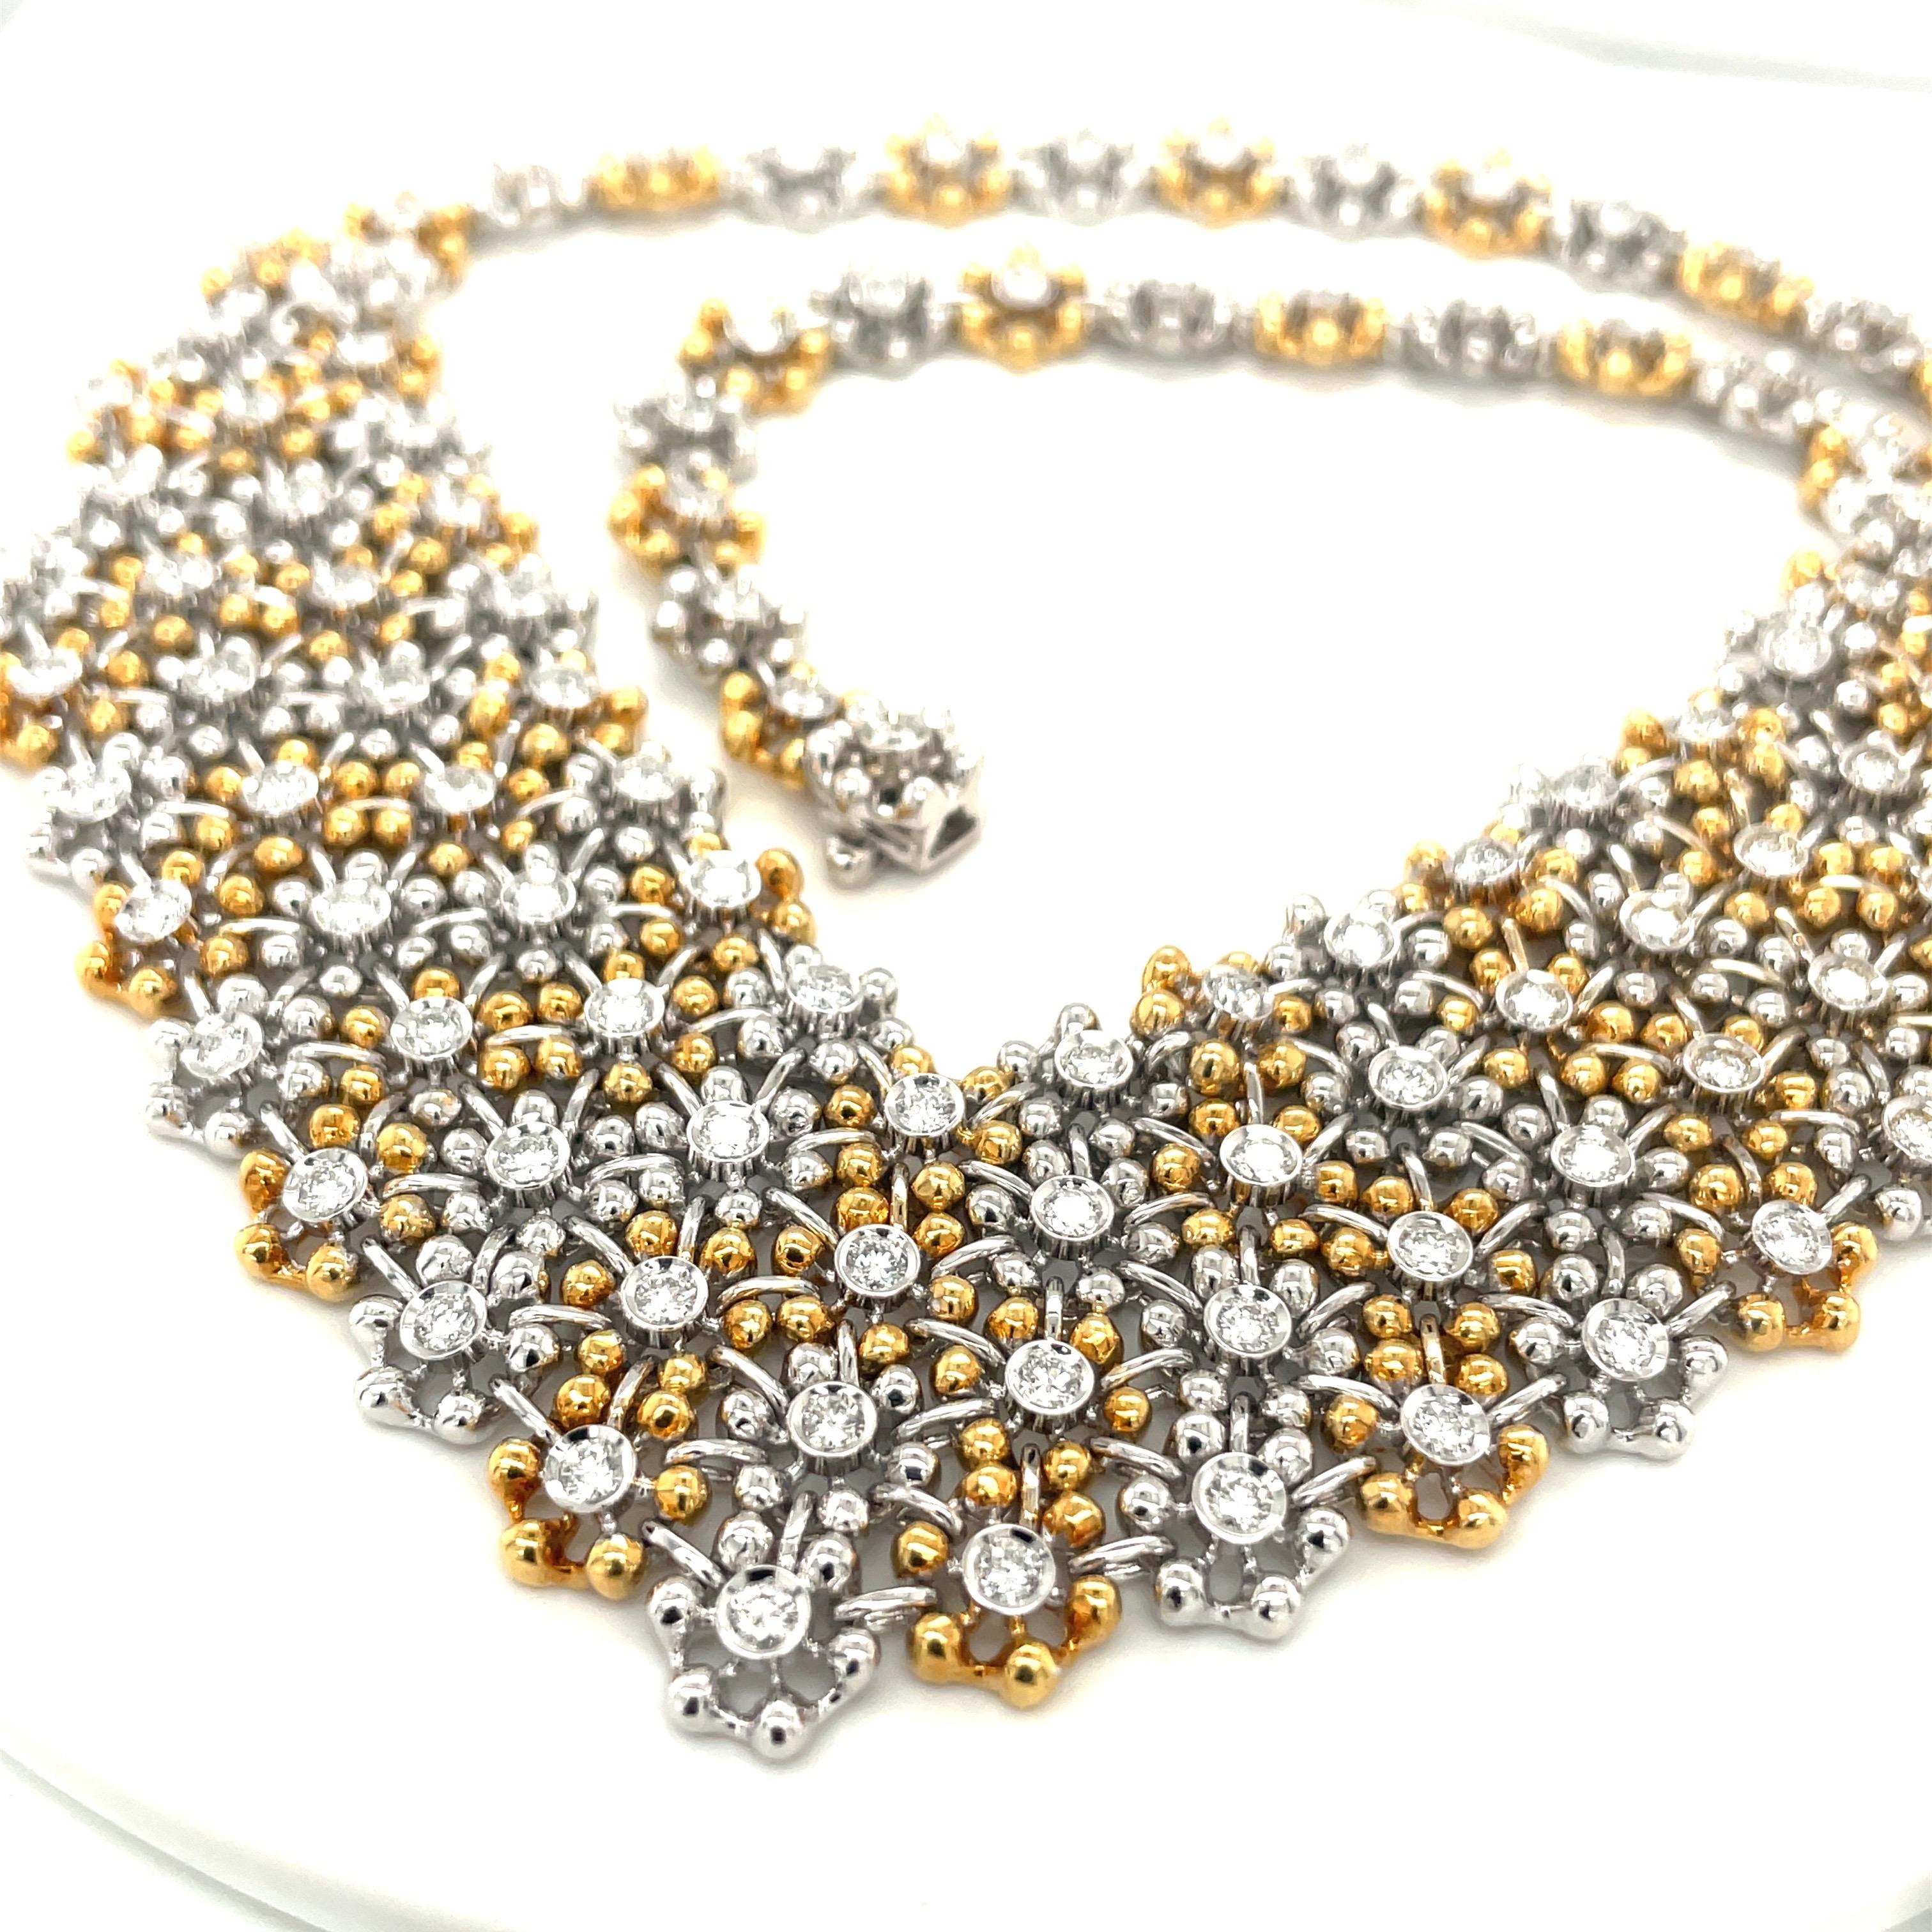 Contemporary Damiani 18KT Yellow and White Gold Bib Necklace with 4.92Ct. Diamond  For Sale